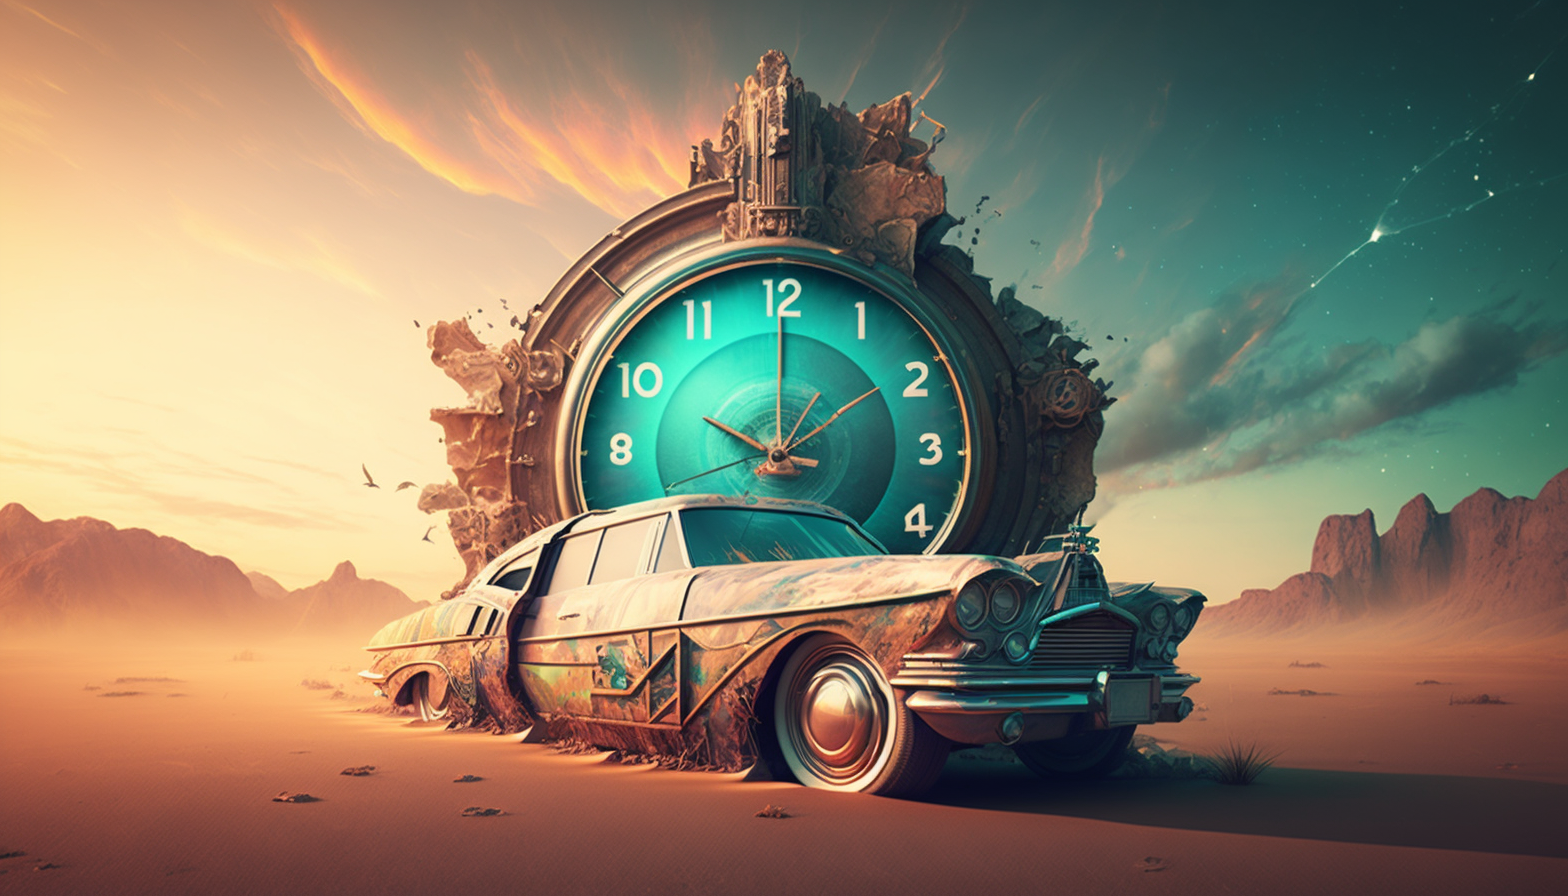 Illustration of a Time Machine made by Midjourney